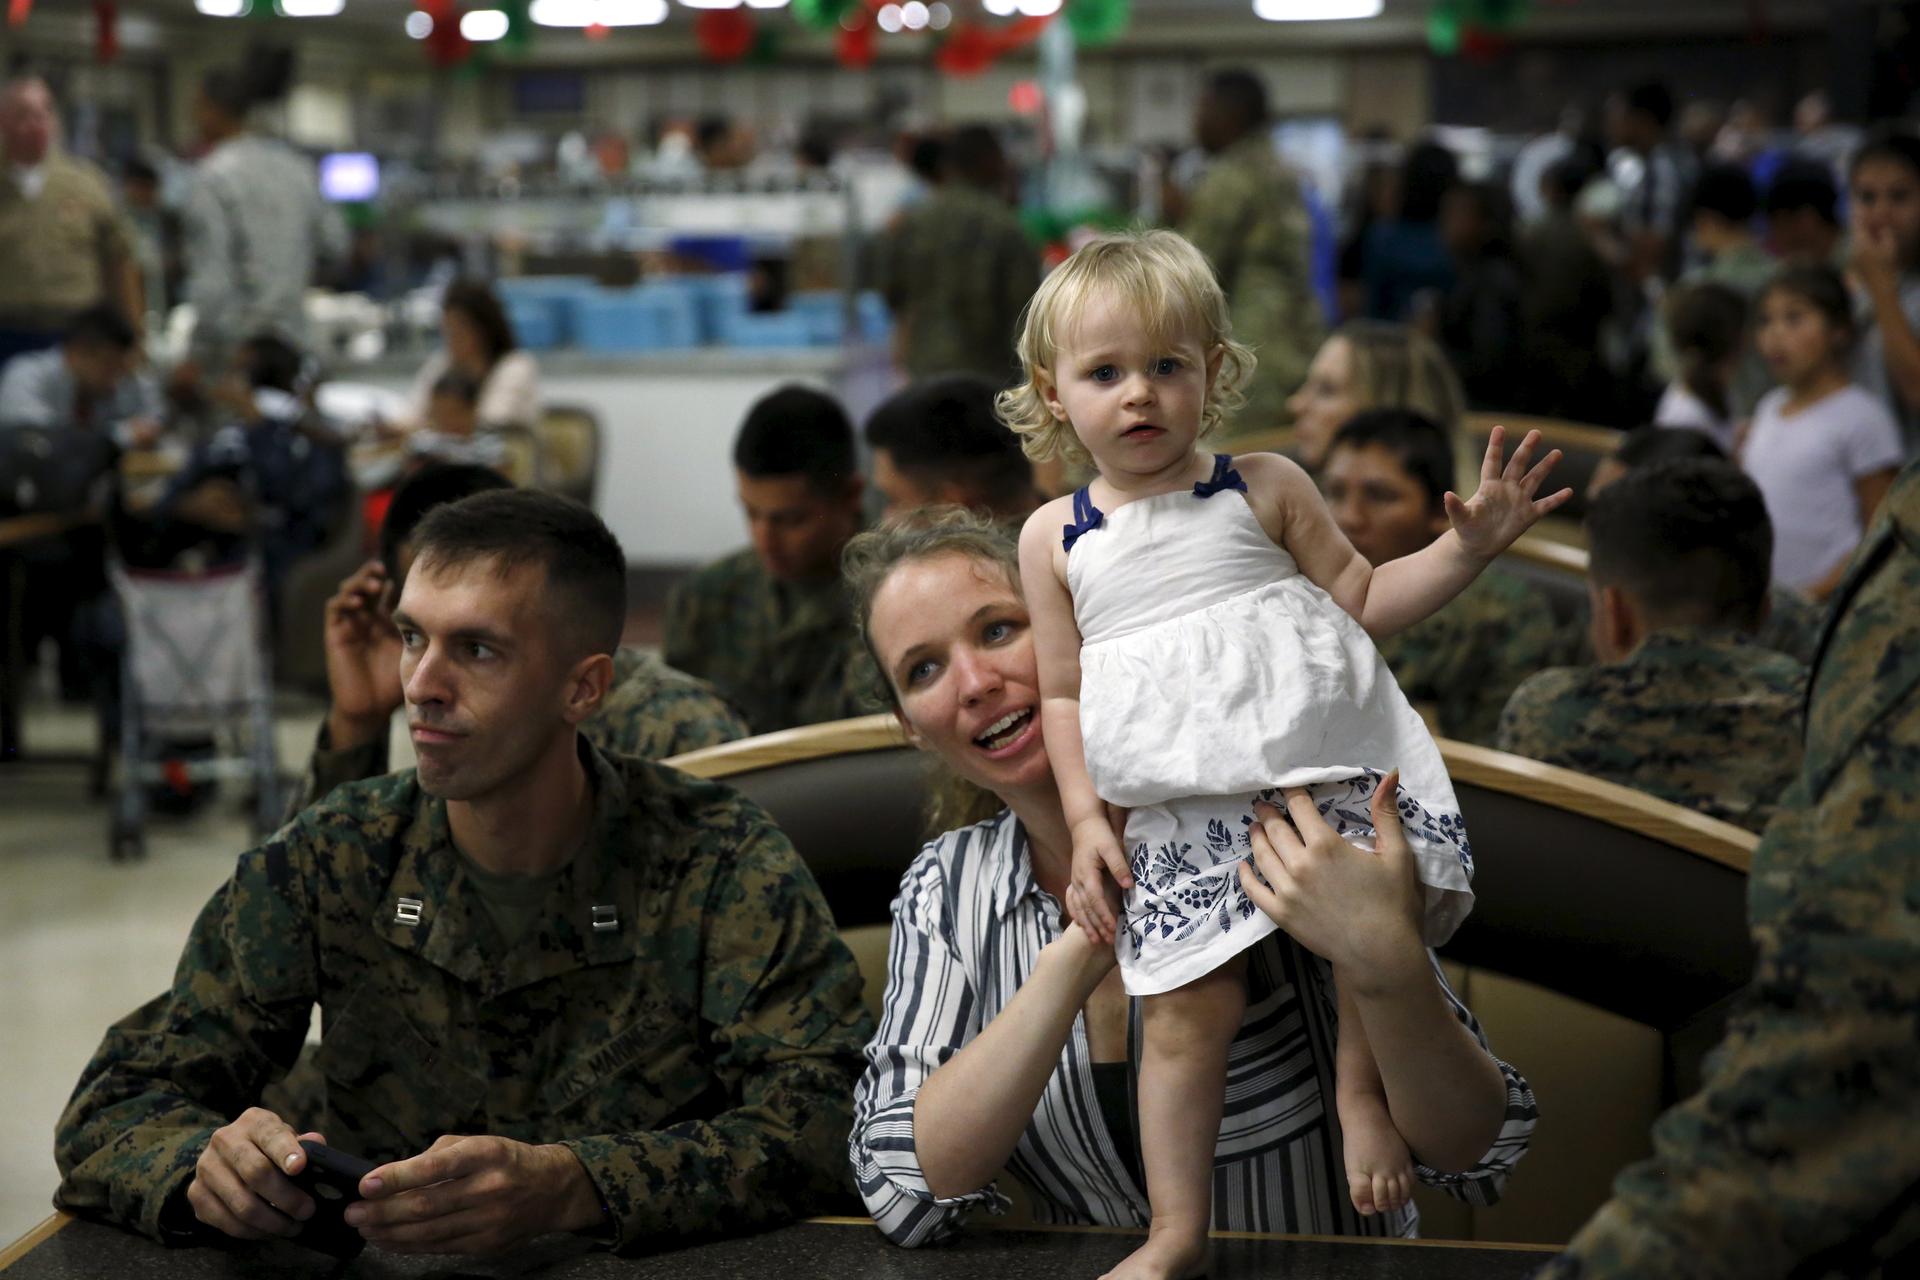 Military families gather for a Christmas reception at Marine Corps Base Hawaii in Kaneohe Bay